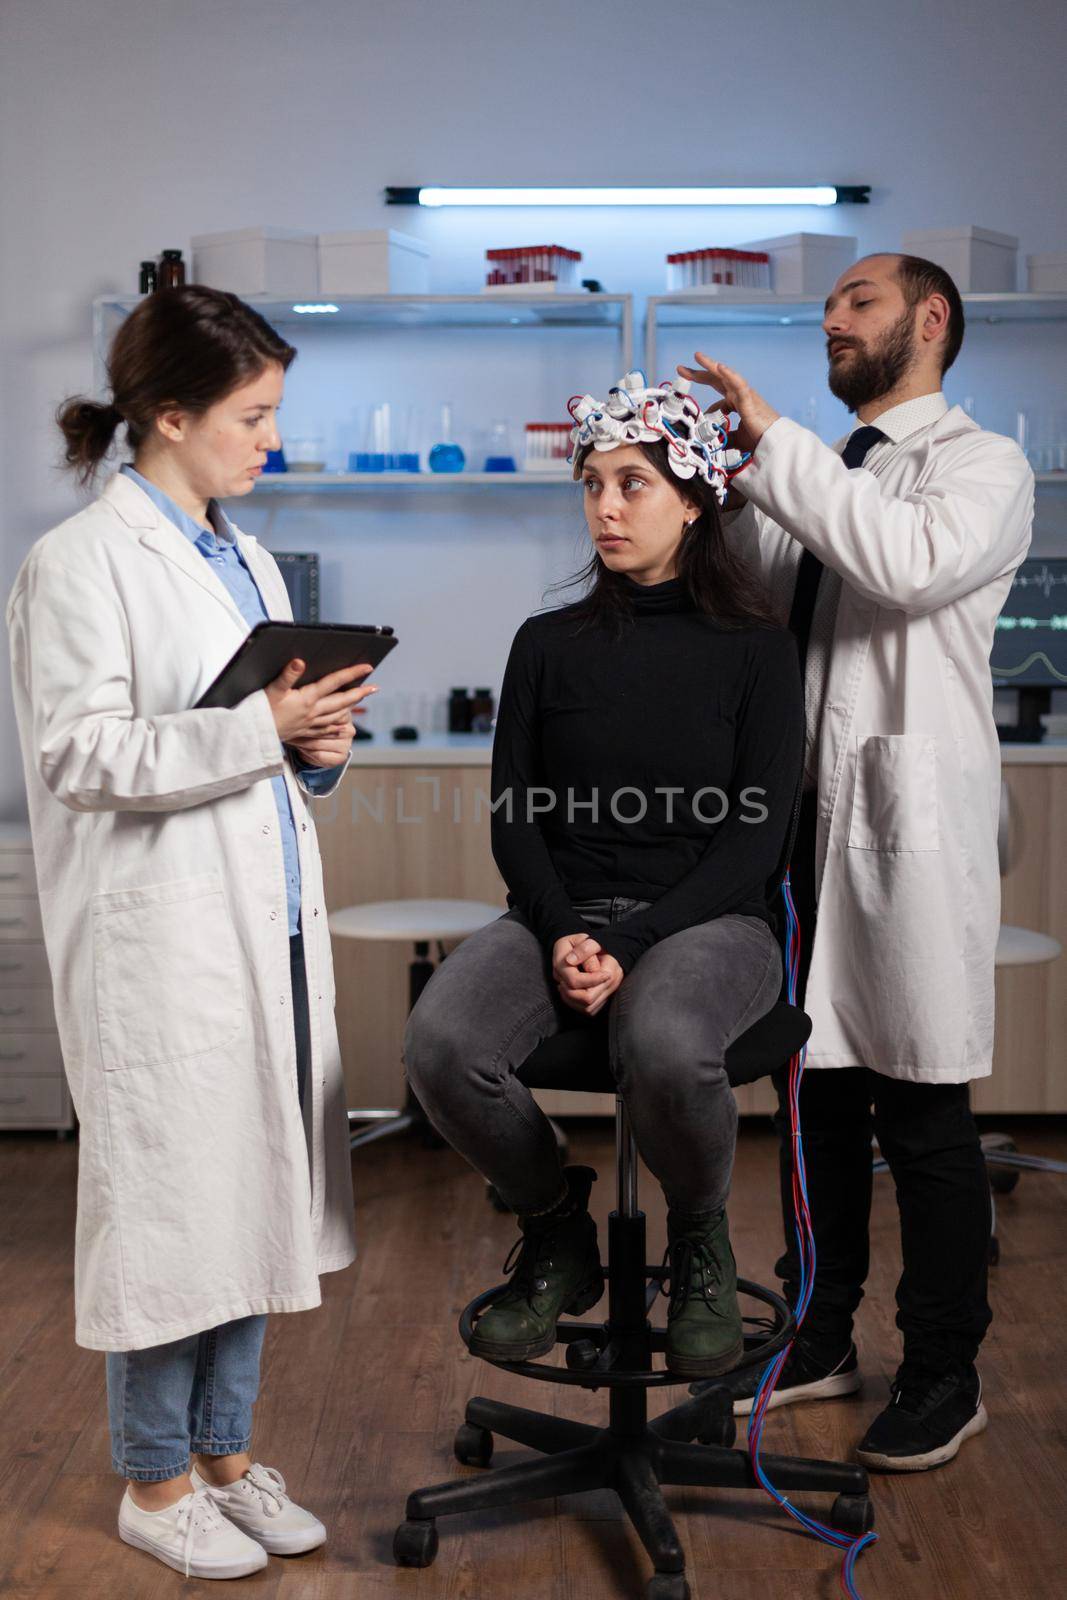 Scientist doctor explaining neurology disease symptoms to woman patient while neurologist researcher adjusting eeg headset during neuroscience experiment in lab. Specialist analyzing brain activity